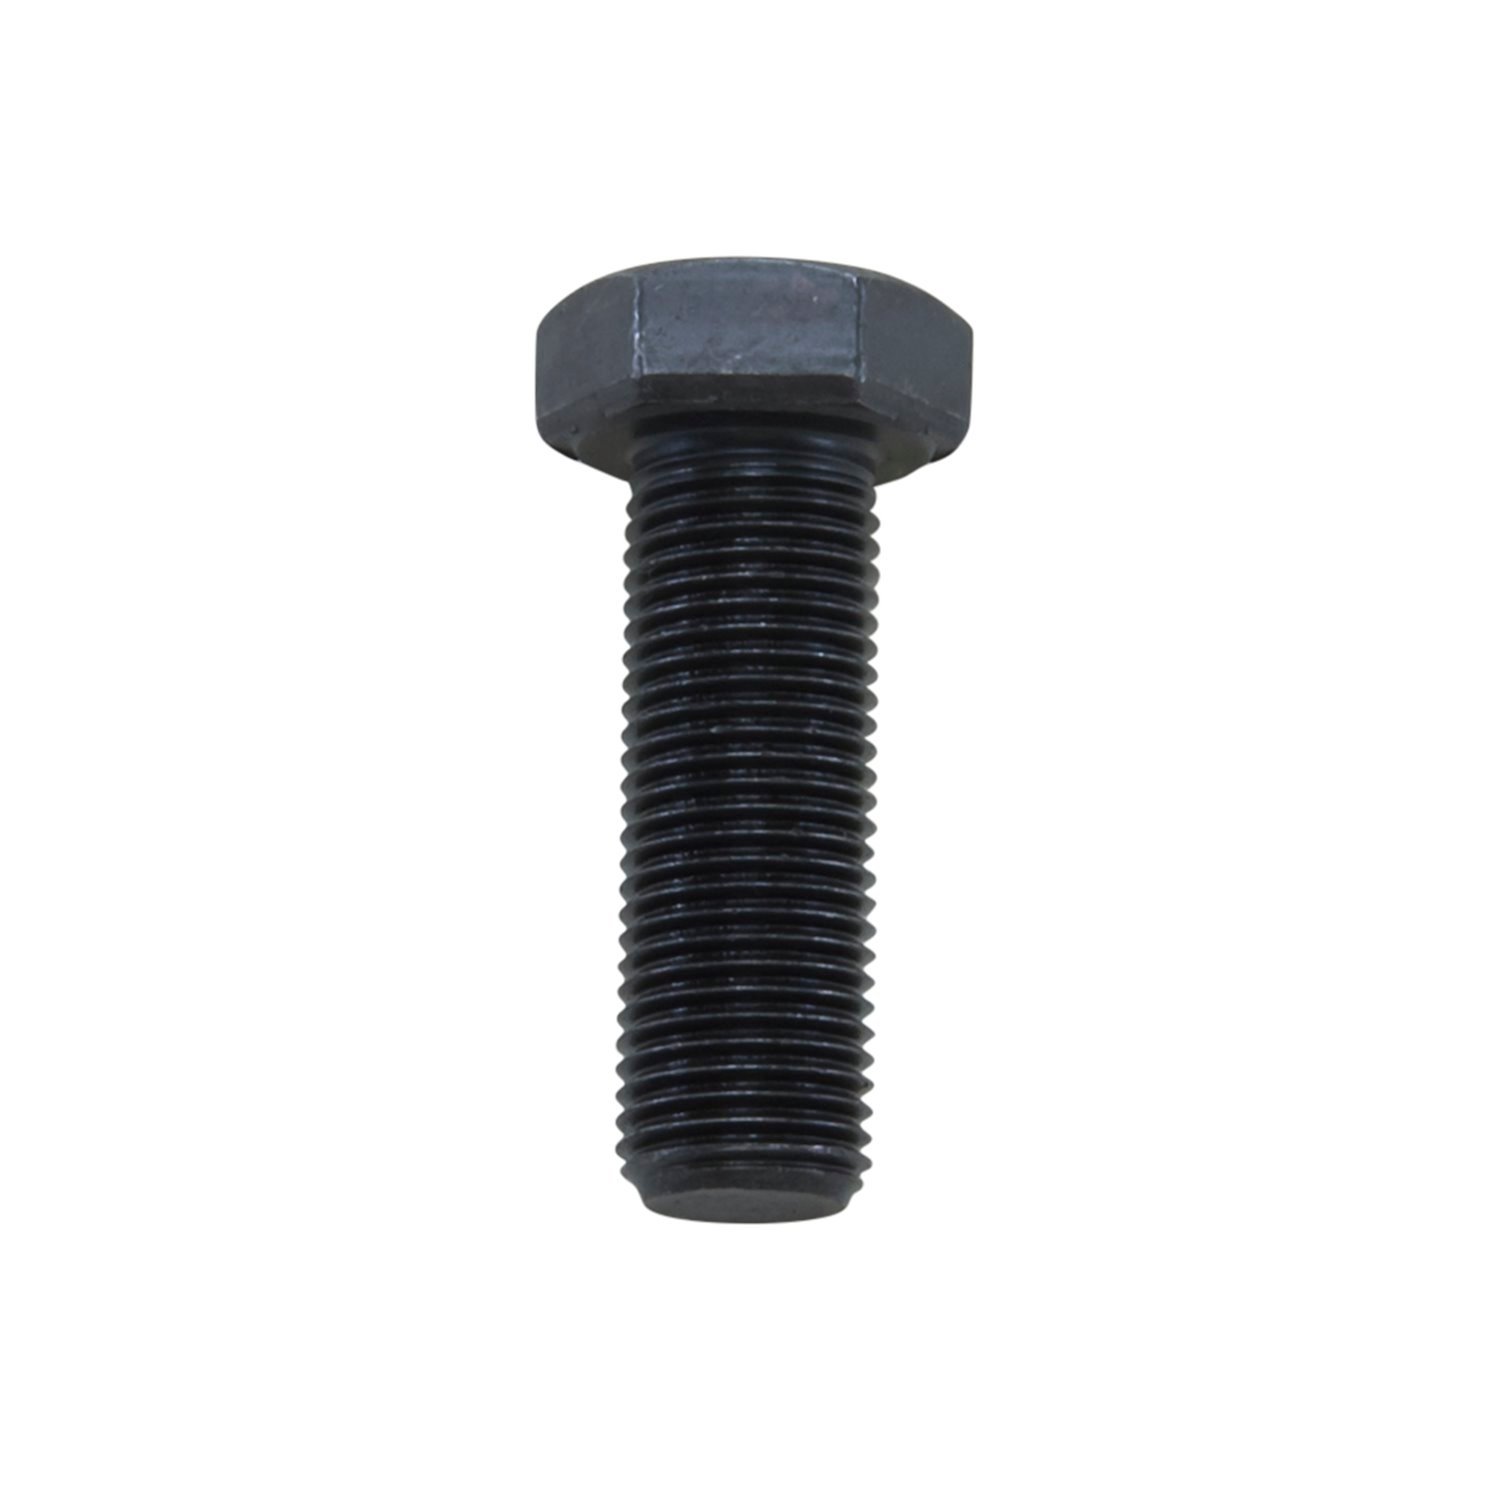 Model 35 & Other Screw-Inaxle Stud, 1/2 in. -20 X 1.5